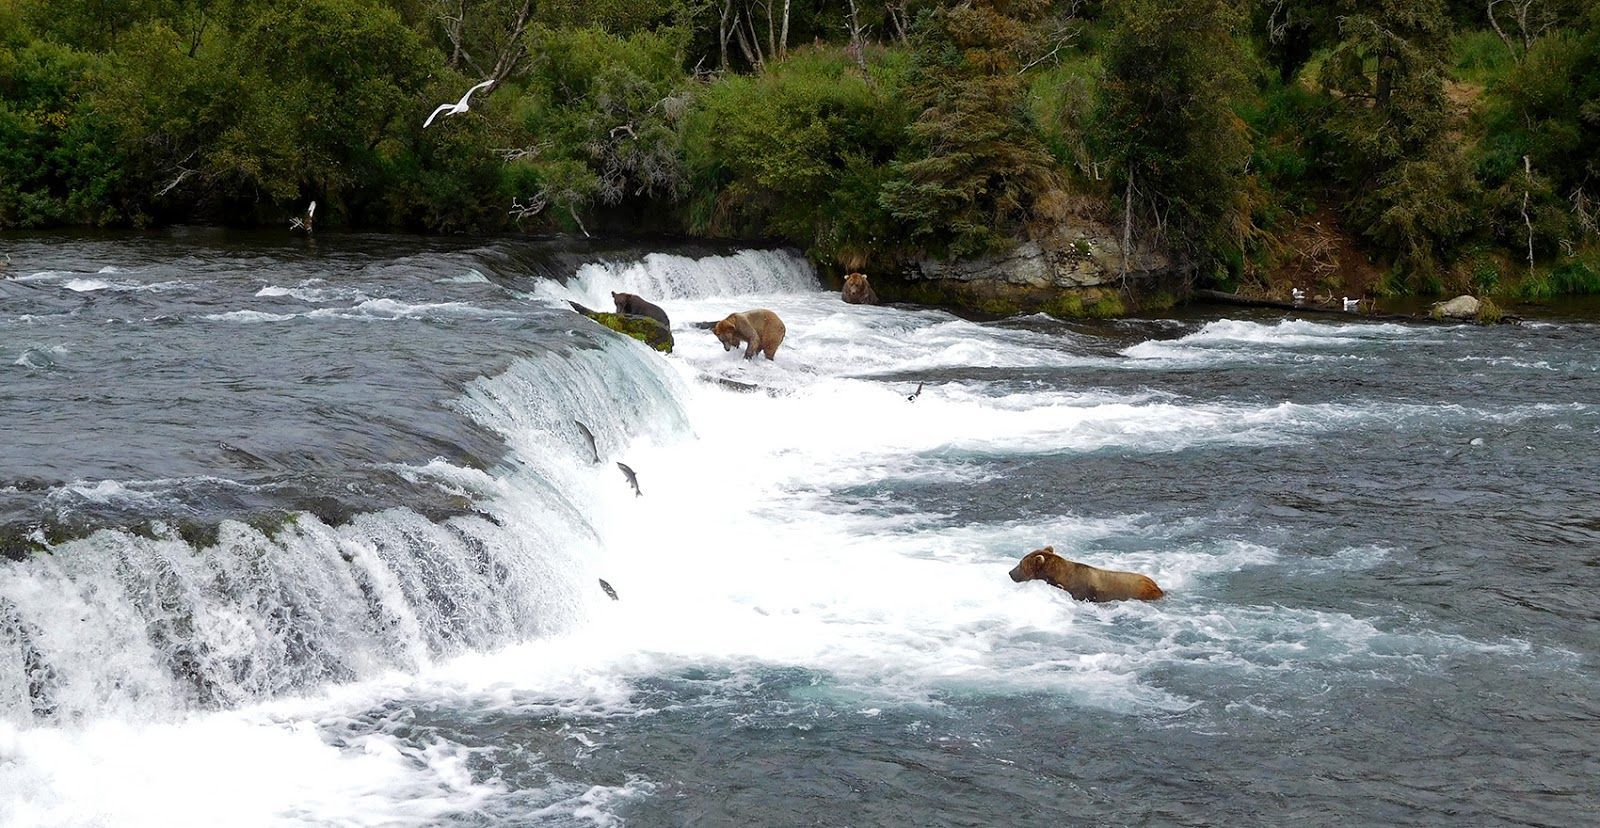 KATMAI NATIONAL PARK: EVERYTHING YOU NEED TO KNOW